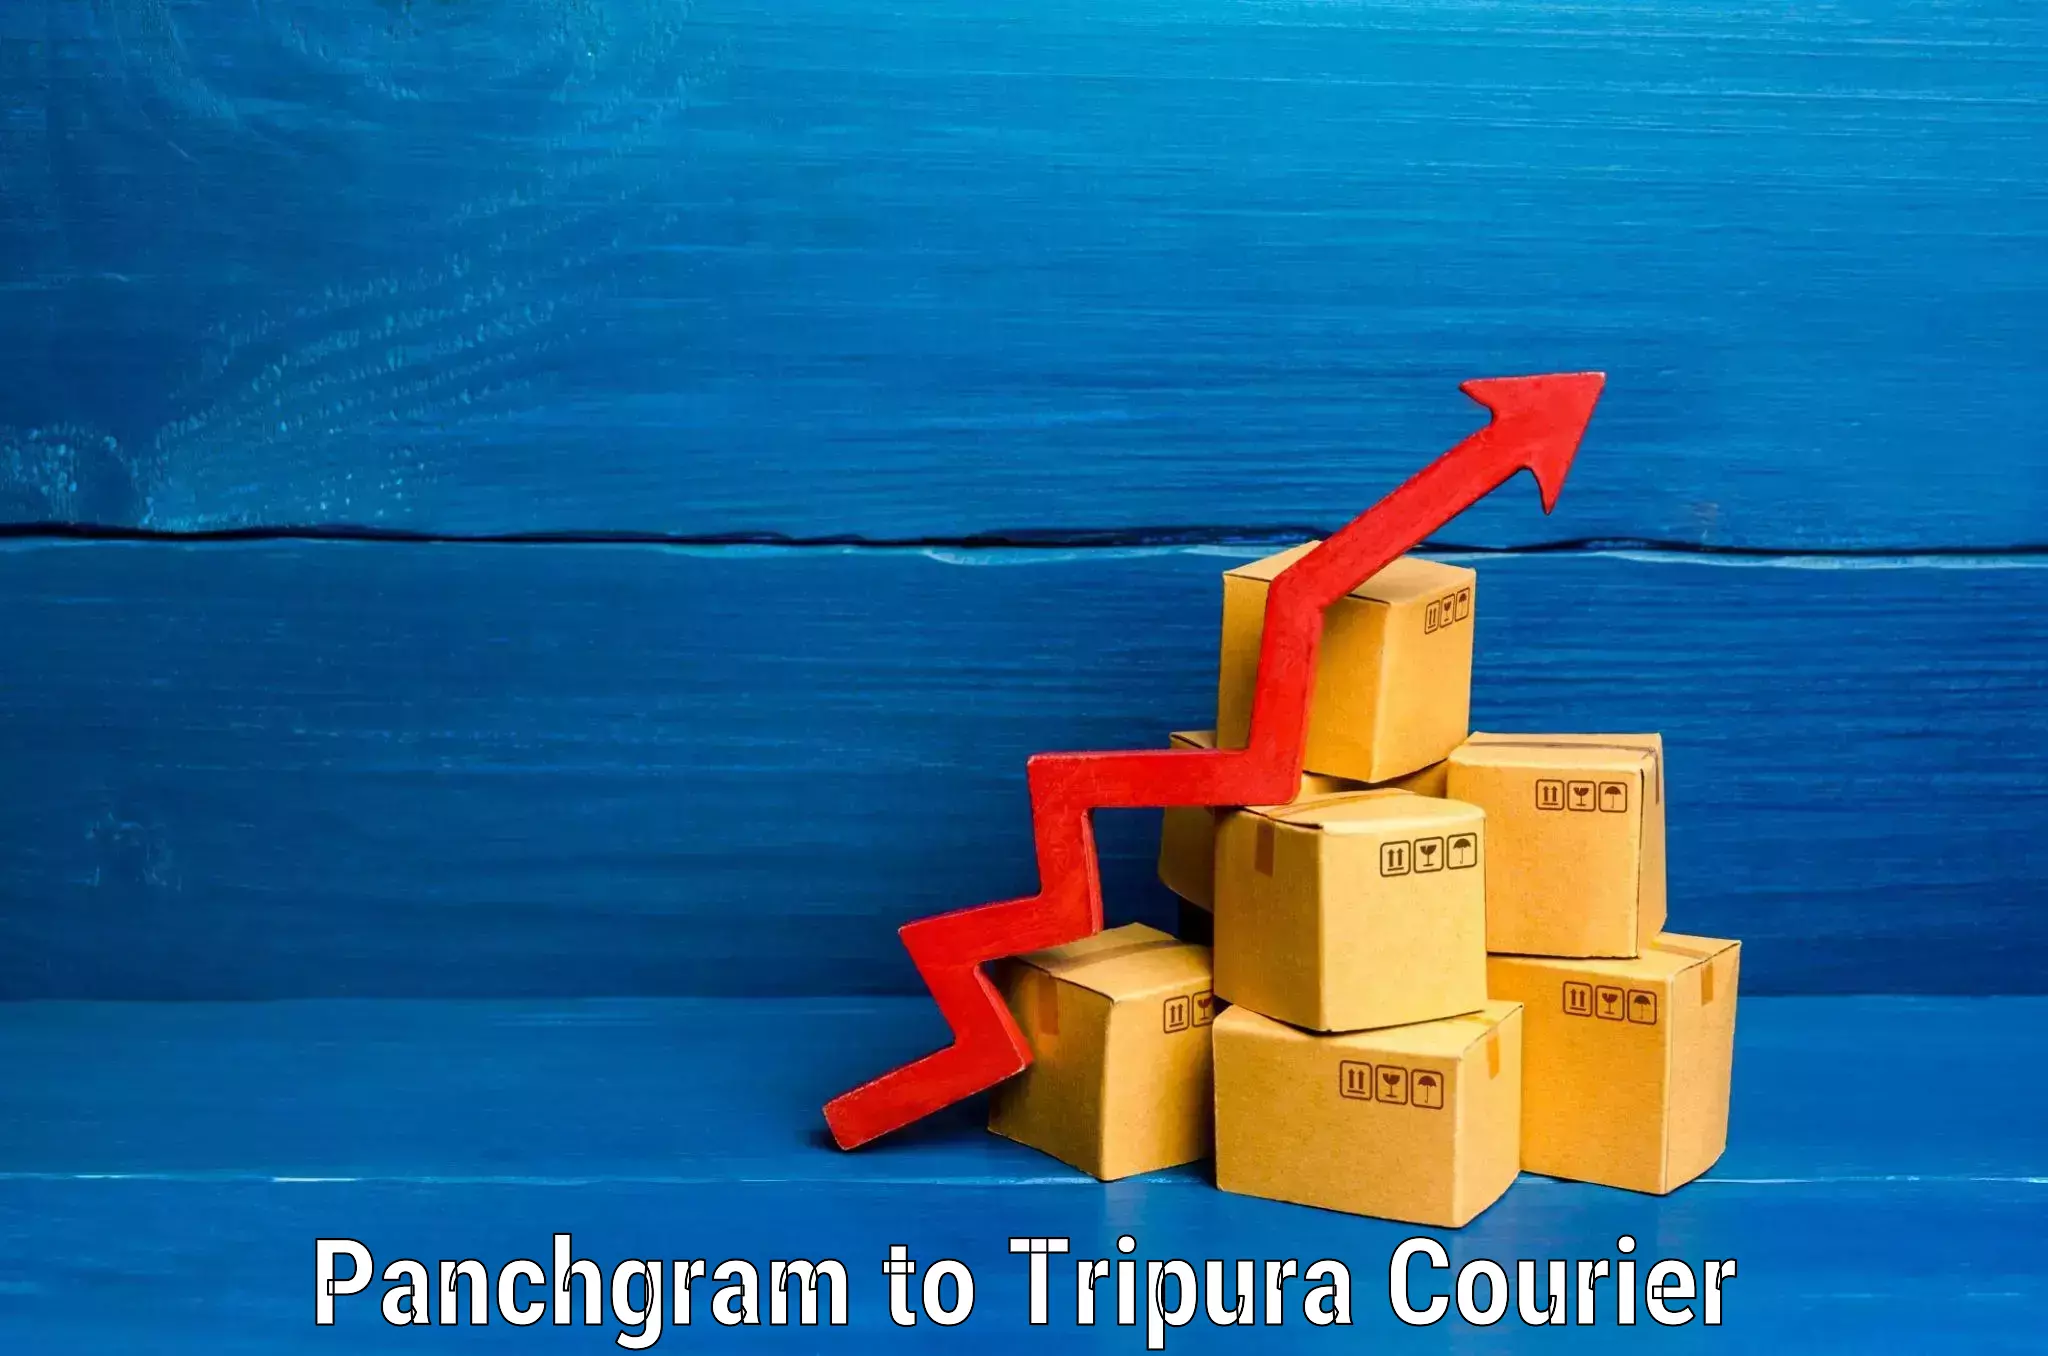 Group luggage shipping in Panchgram to Udaipur Tripura